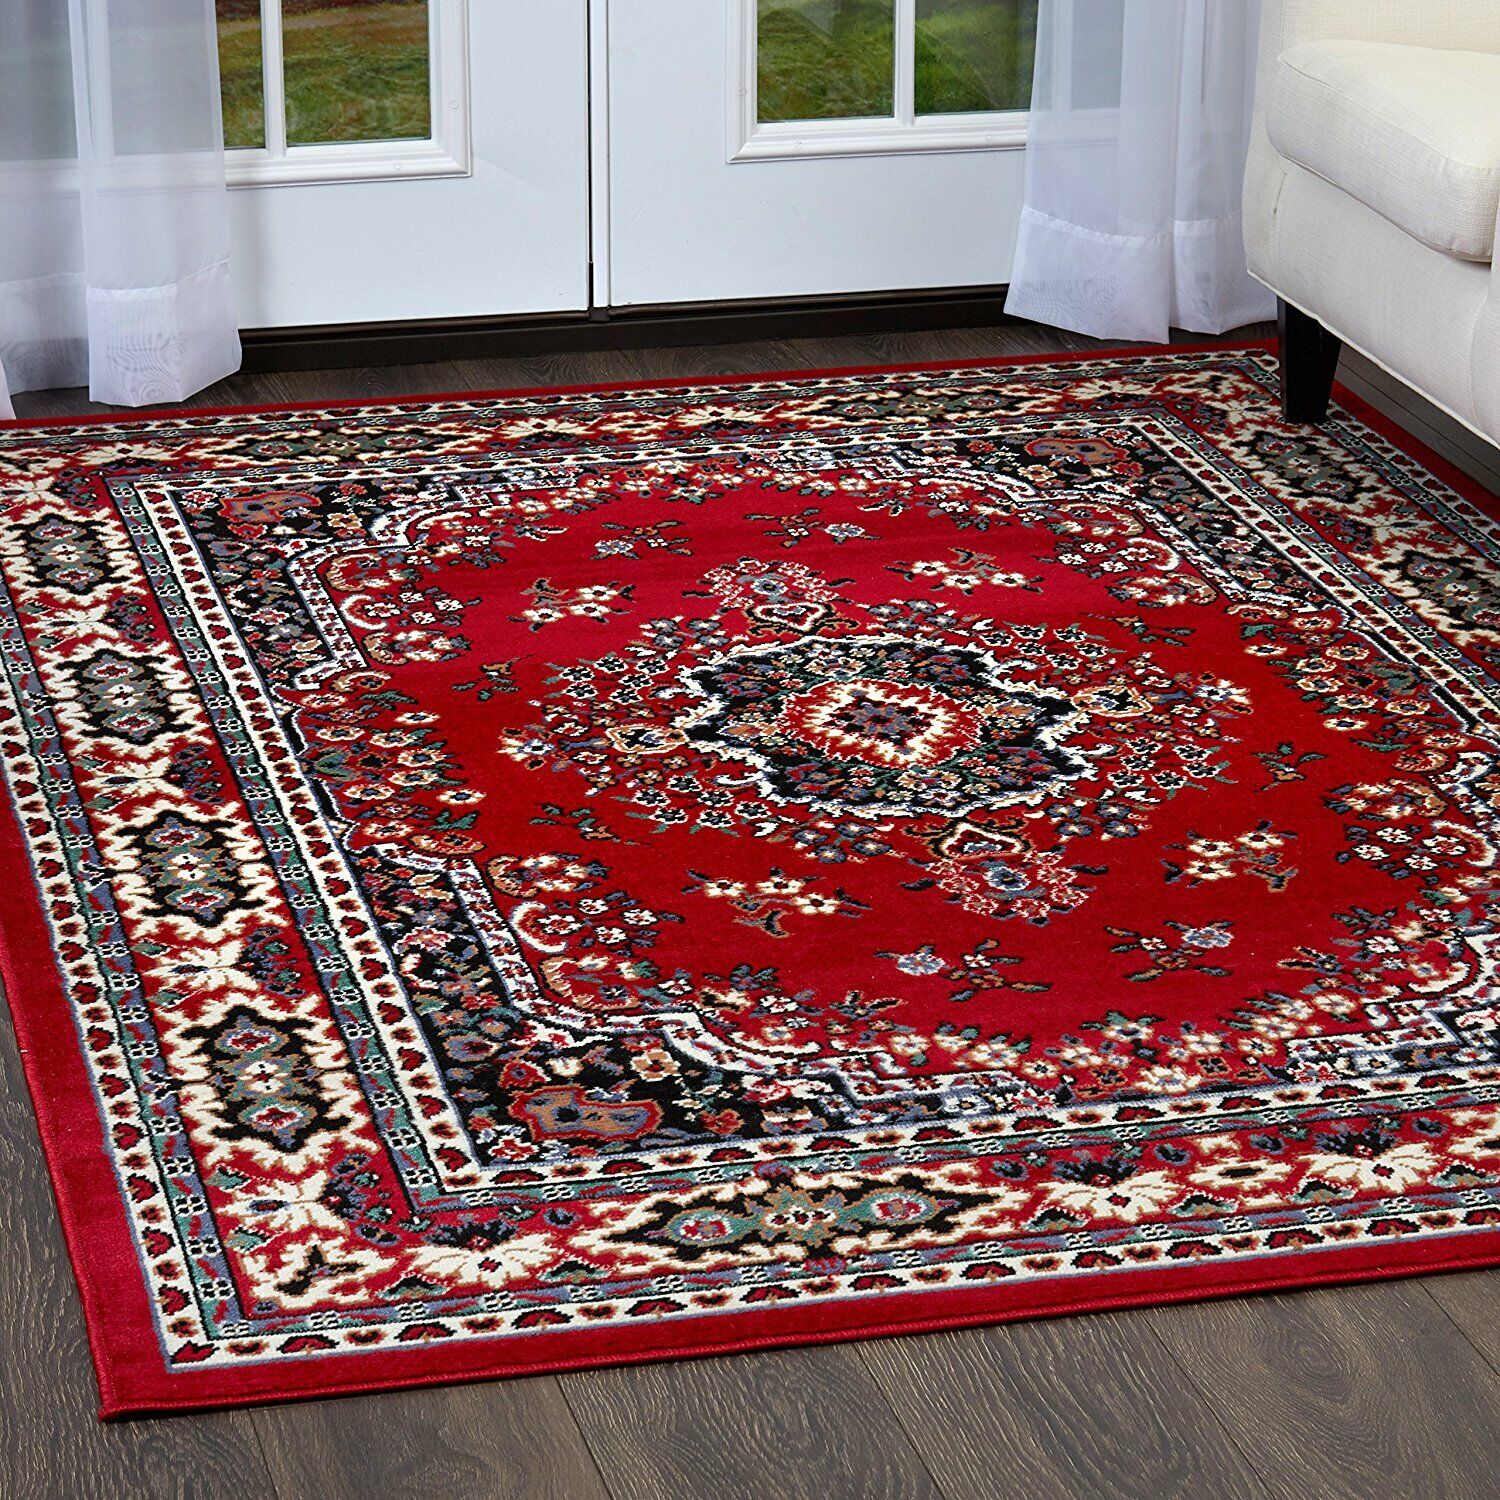 Red Green Blue 3 pc Area Rug Set Accent Mat Bordered Carpet Runner 5 x 7 ft 2x3 Unknown Does Not Apply - фотография #2